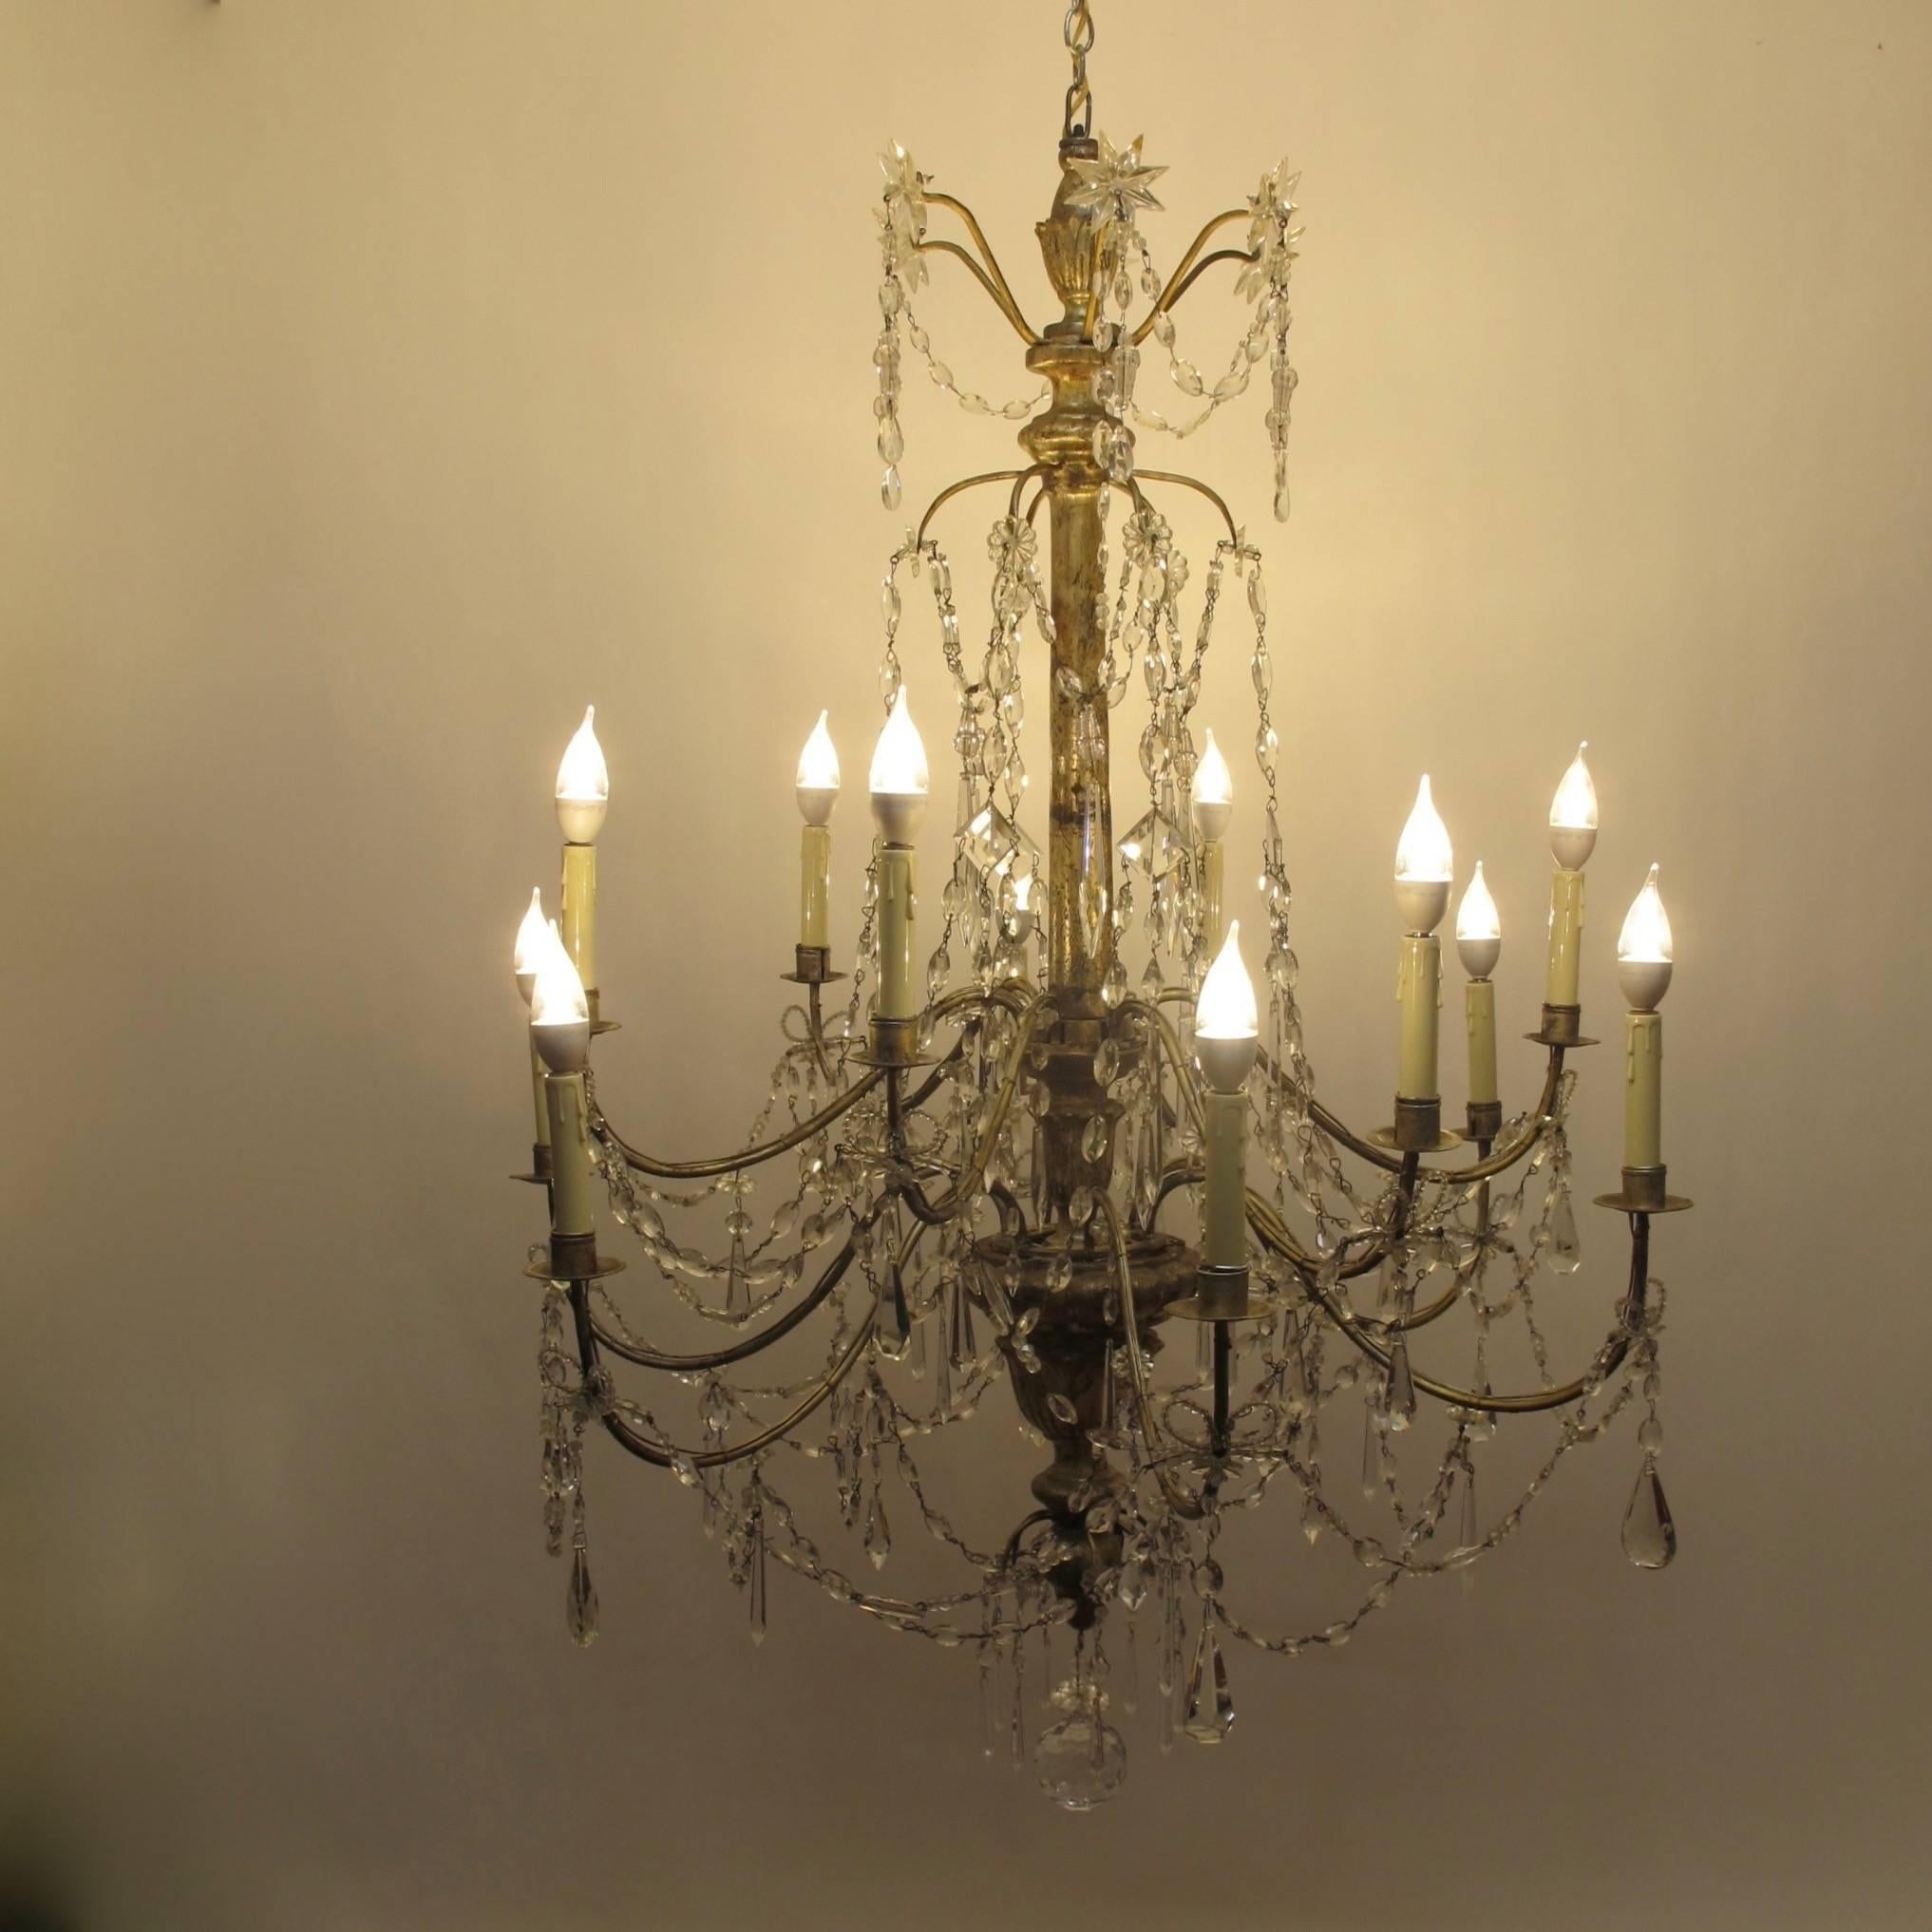 An exceptional 18th century or early 19th century Italian twelve-arm candle light chandelier. Silver gilt wood and iron frame with crystal pendants and glass swags.
Recently re-conditioned and electrified.